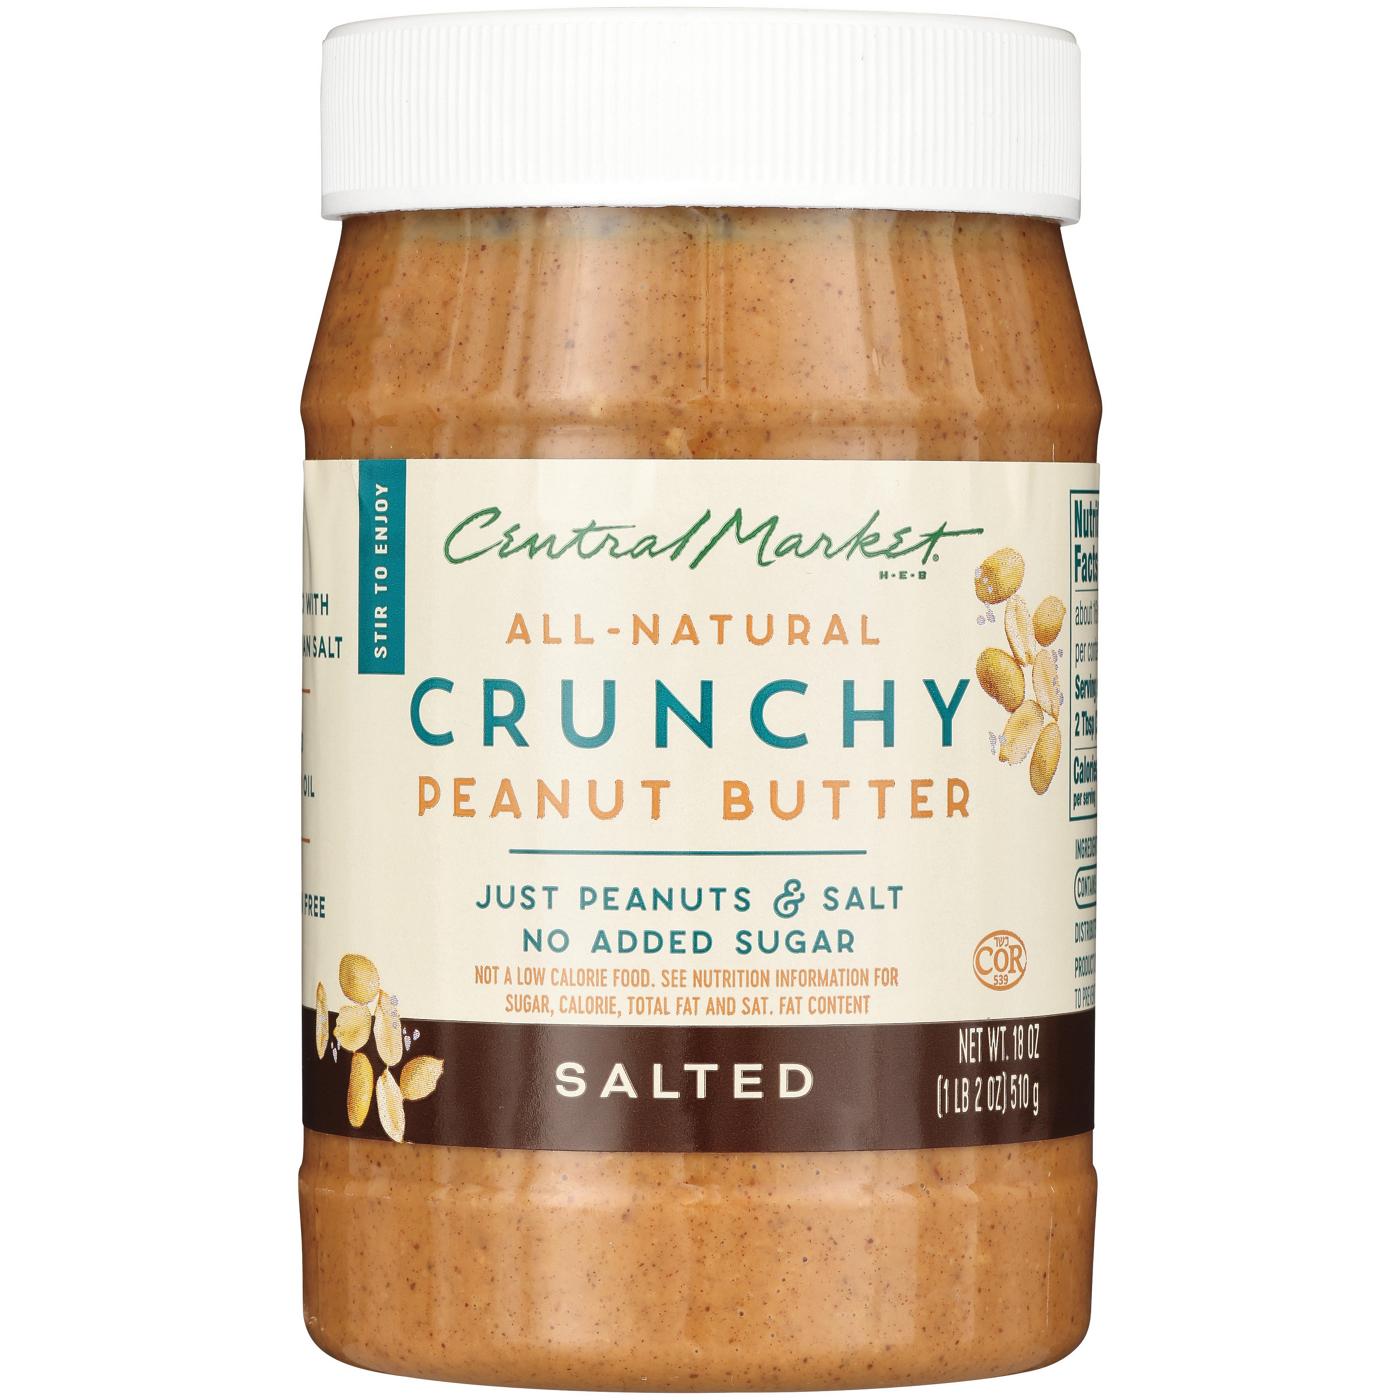 Central Market All-Natural Crunchy Peanut Butter – Salted; image 1 of 2